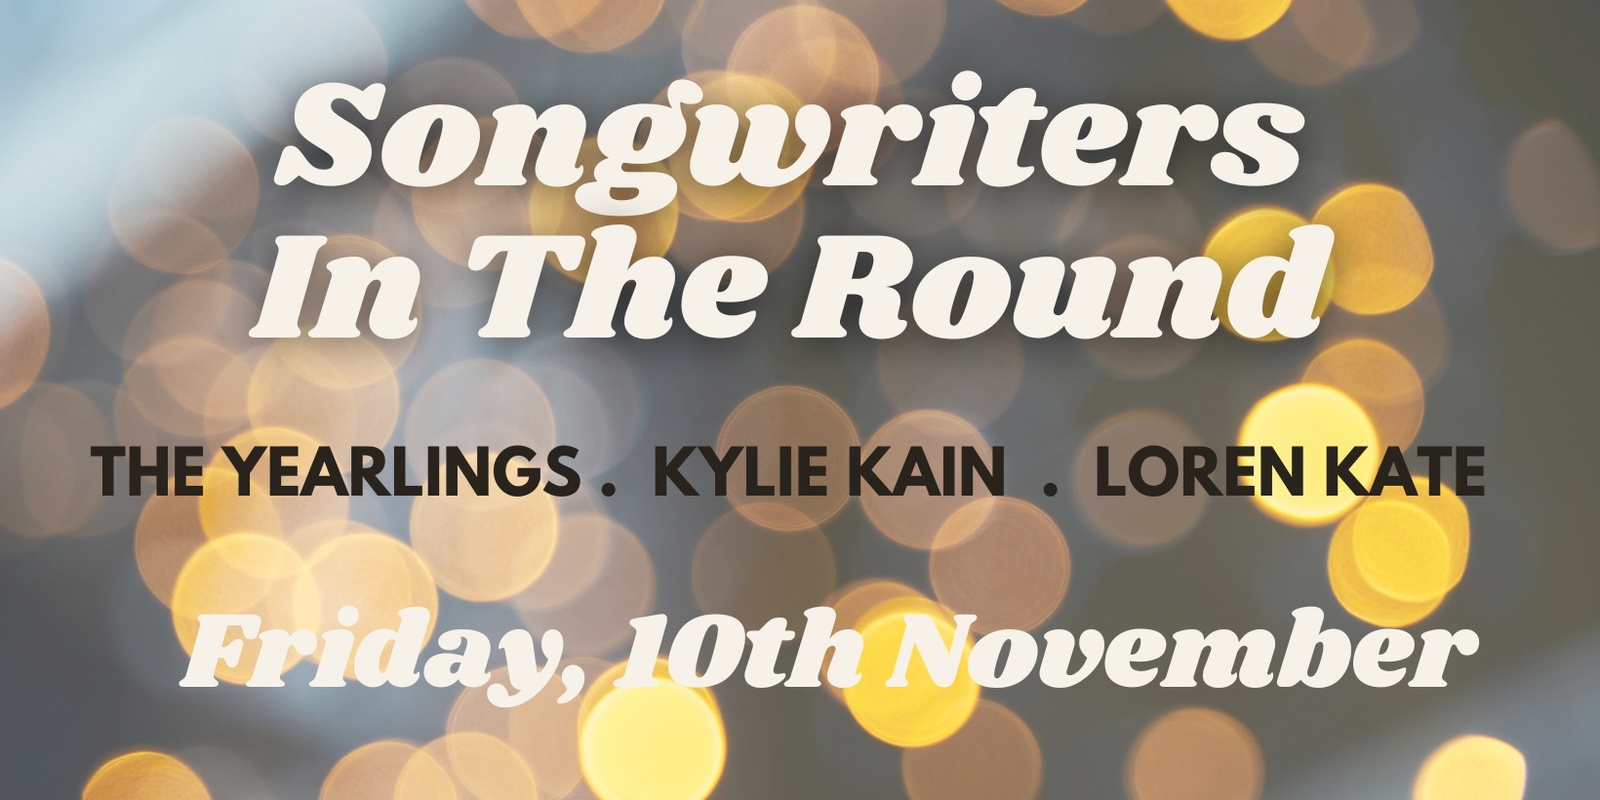 Banner image for Songwriters In the Round with Loren Kate & special guests, The Yearlings & Kylie Kain